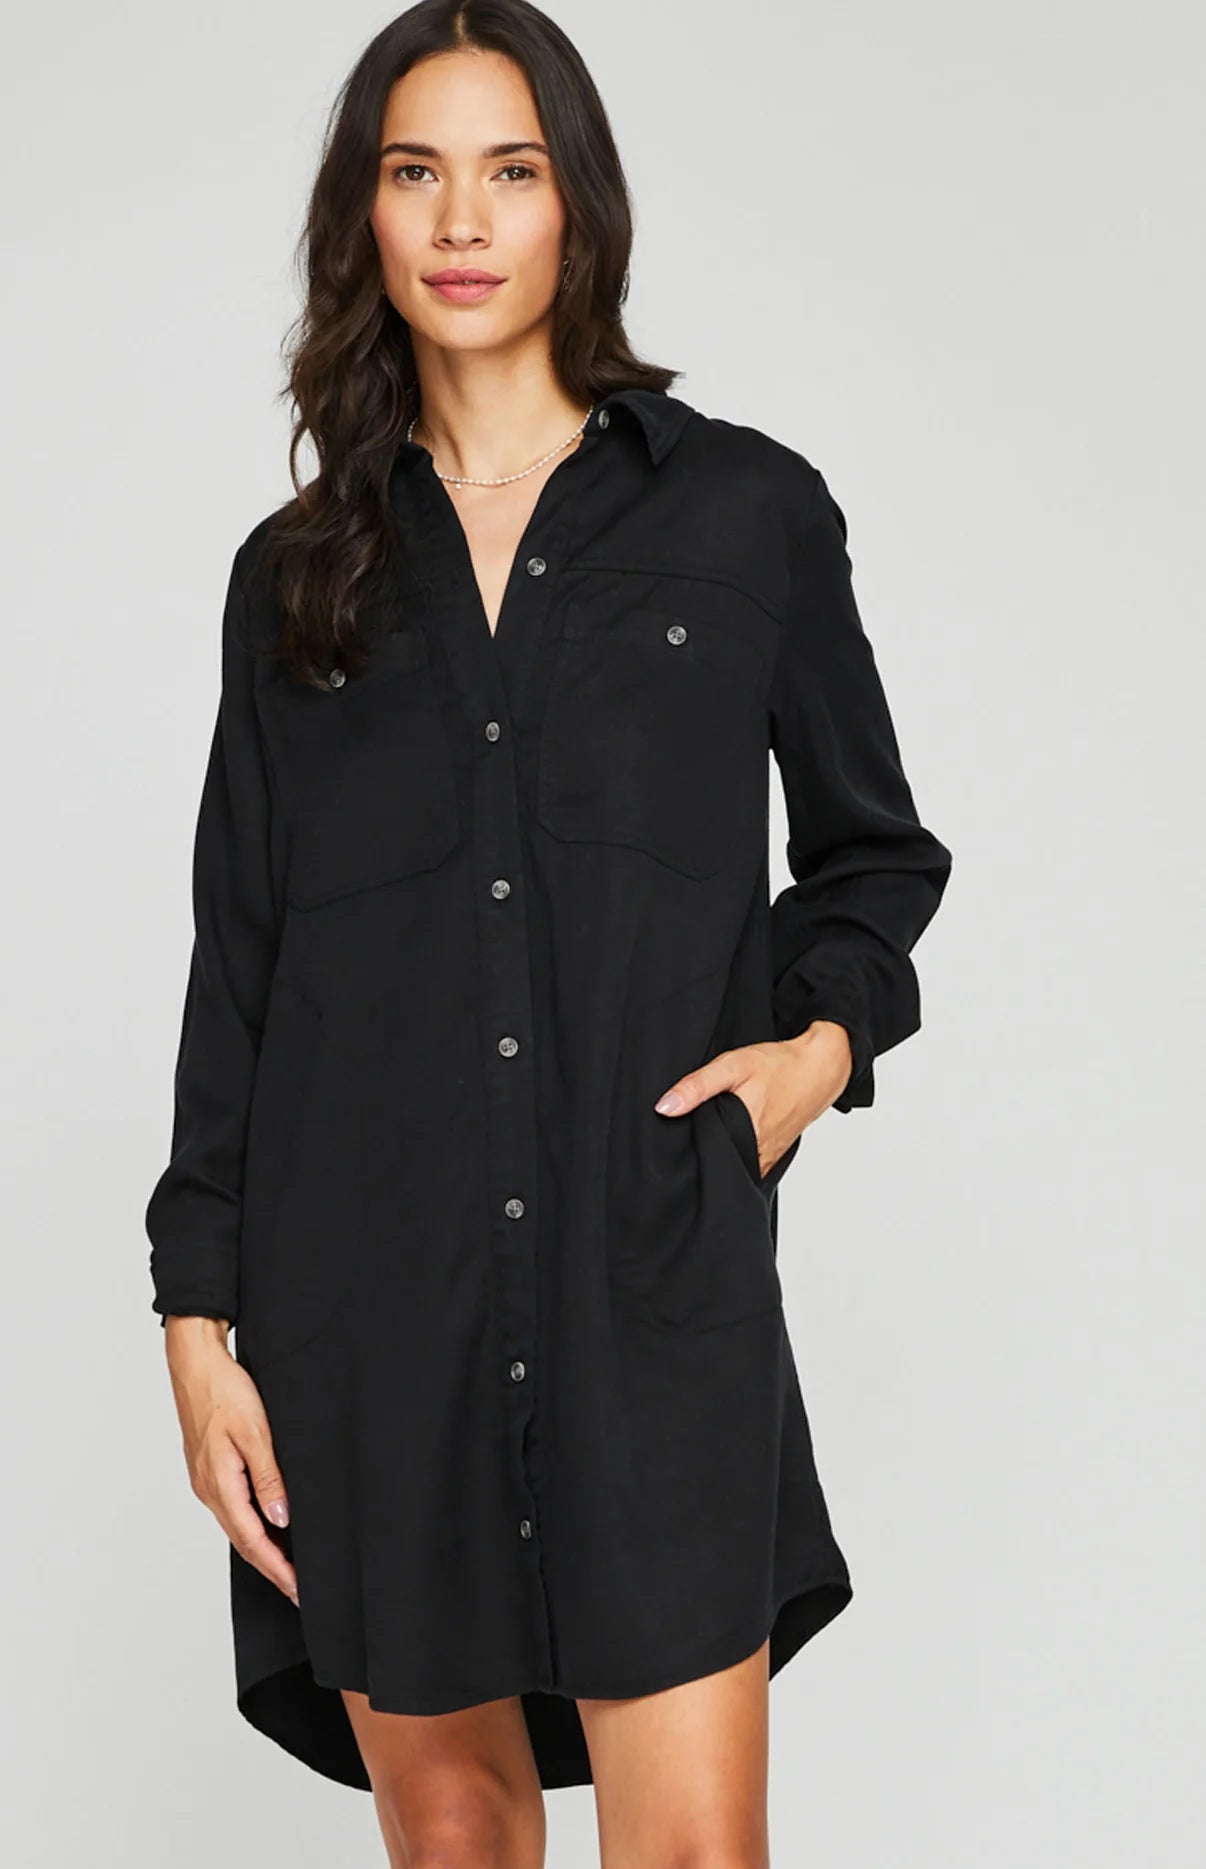 Load image into Gallery viewer, Front view of woman wearing a black button up shirt dress
